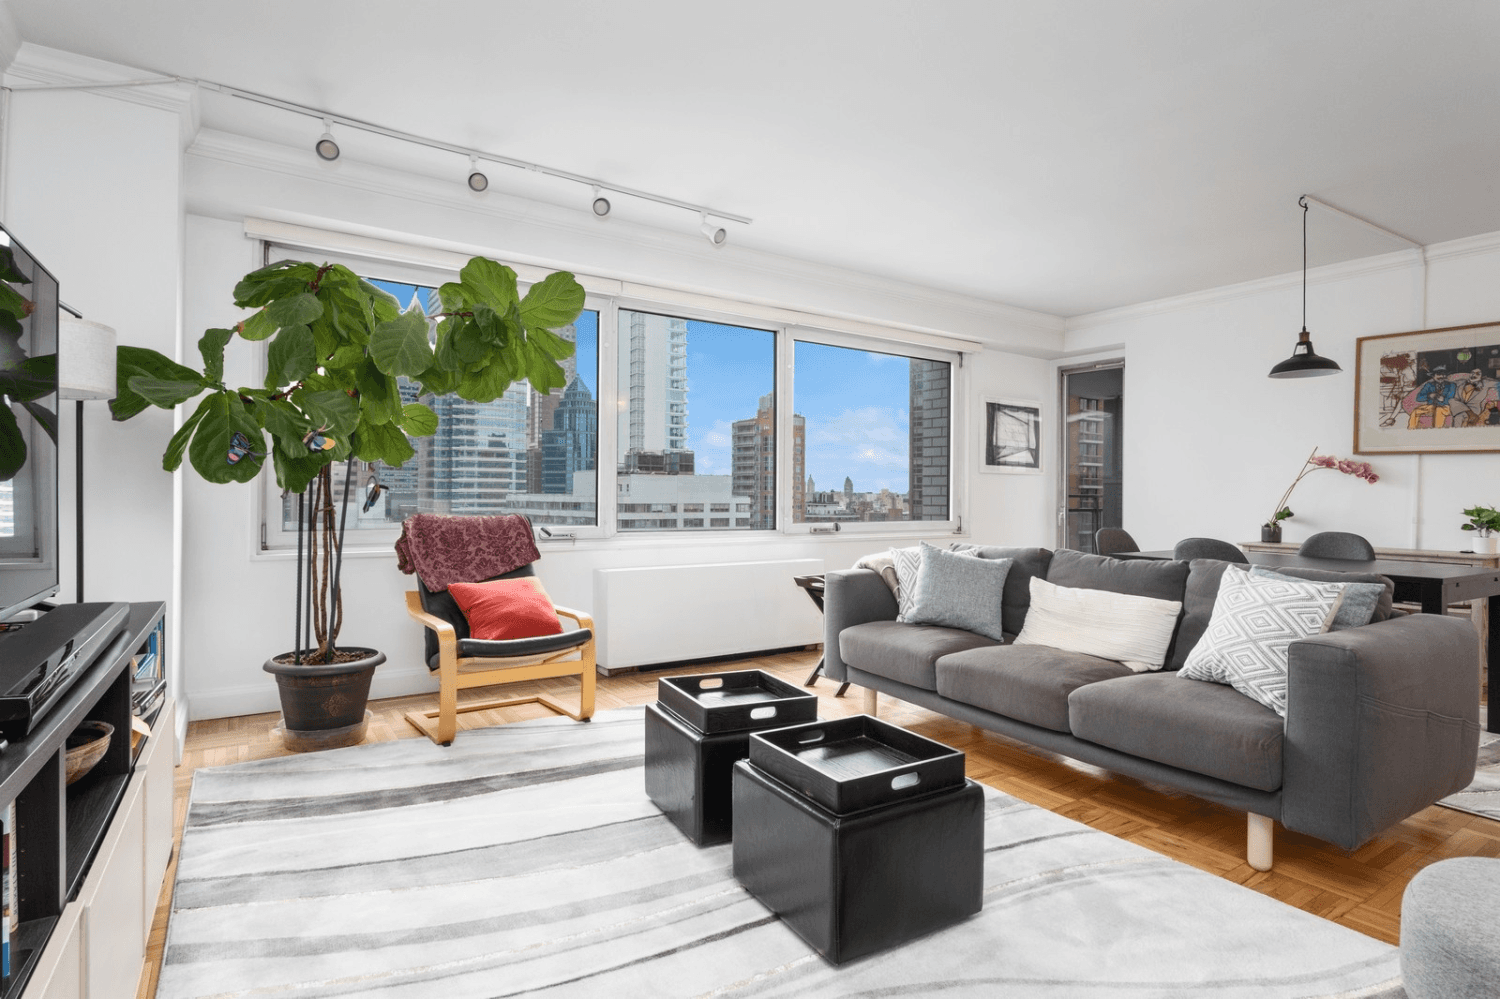 Introducing 22E, a spacious and thoughtfully designed already converted 2 bedroom apartment offering approximately 1100 square feet of luxurious living space.